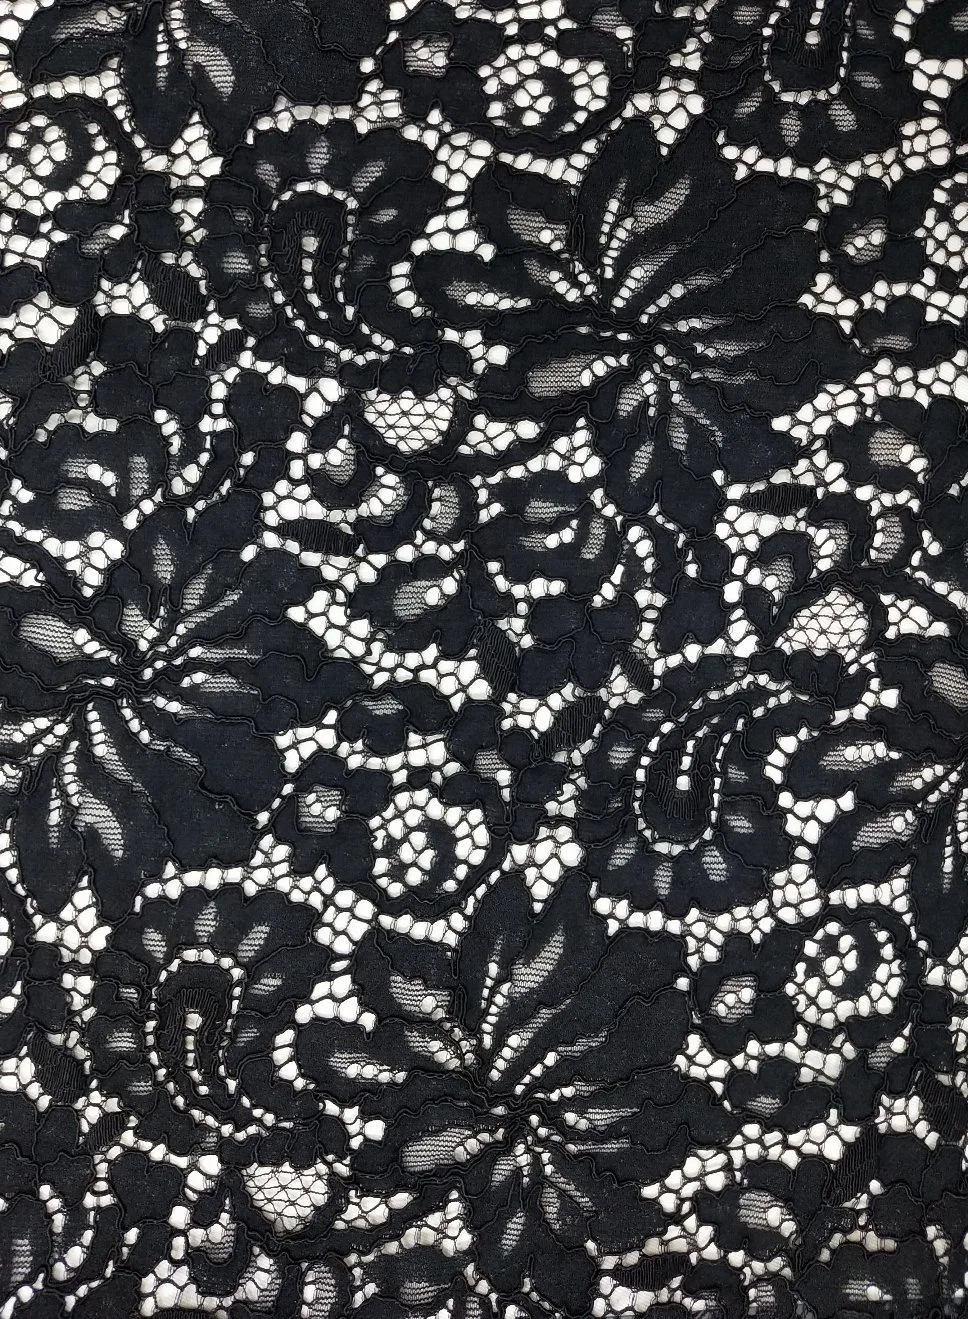 Big Lace Fabric in Stock Lace Fabrics for Fashion Garment Accessory